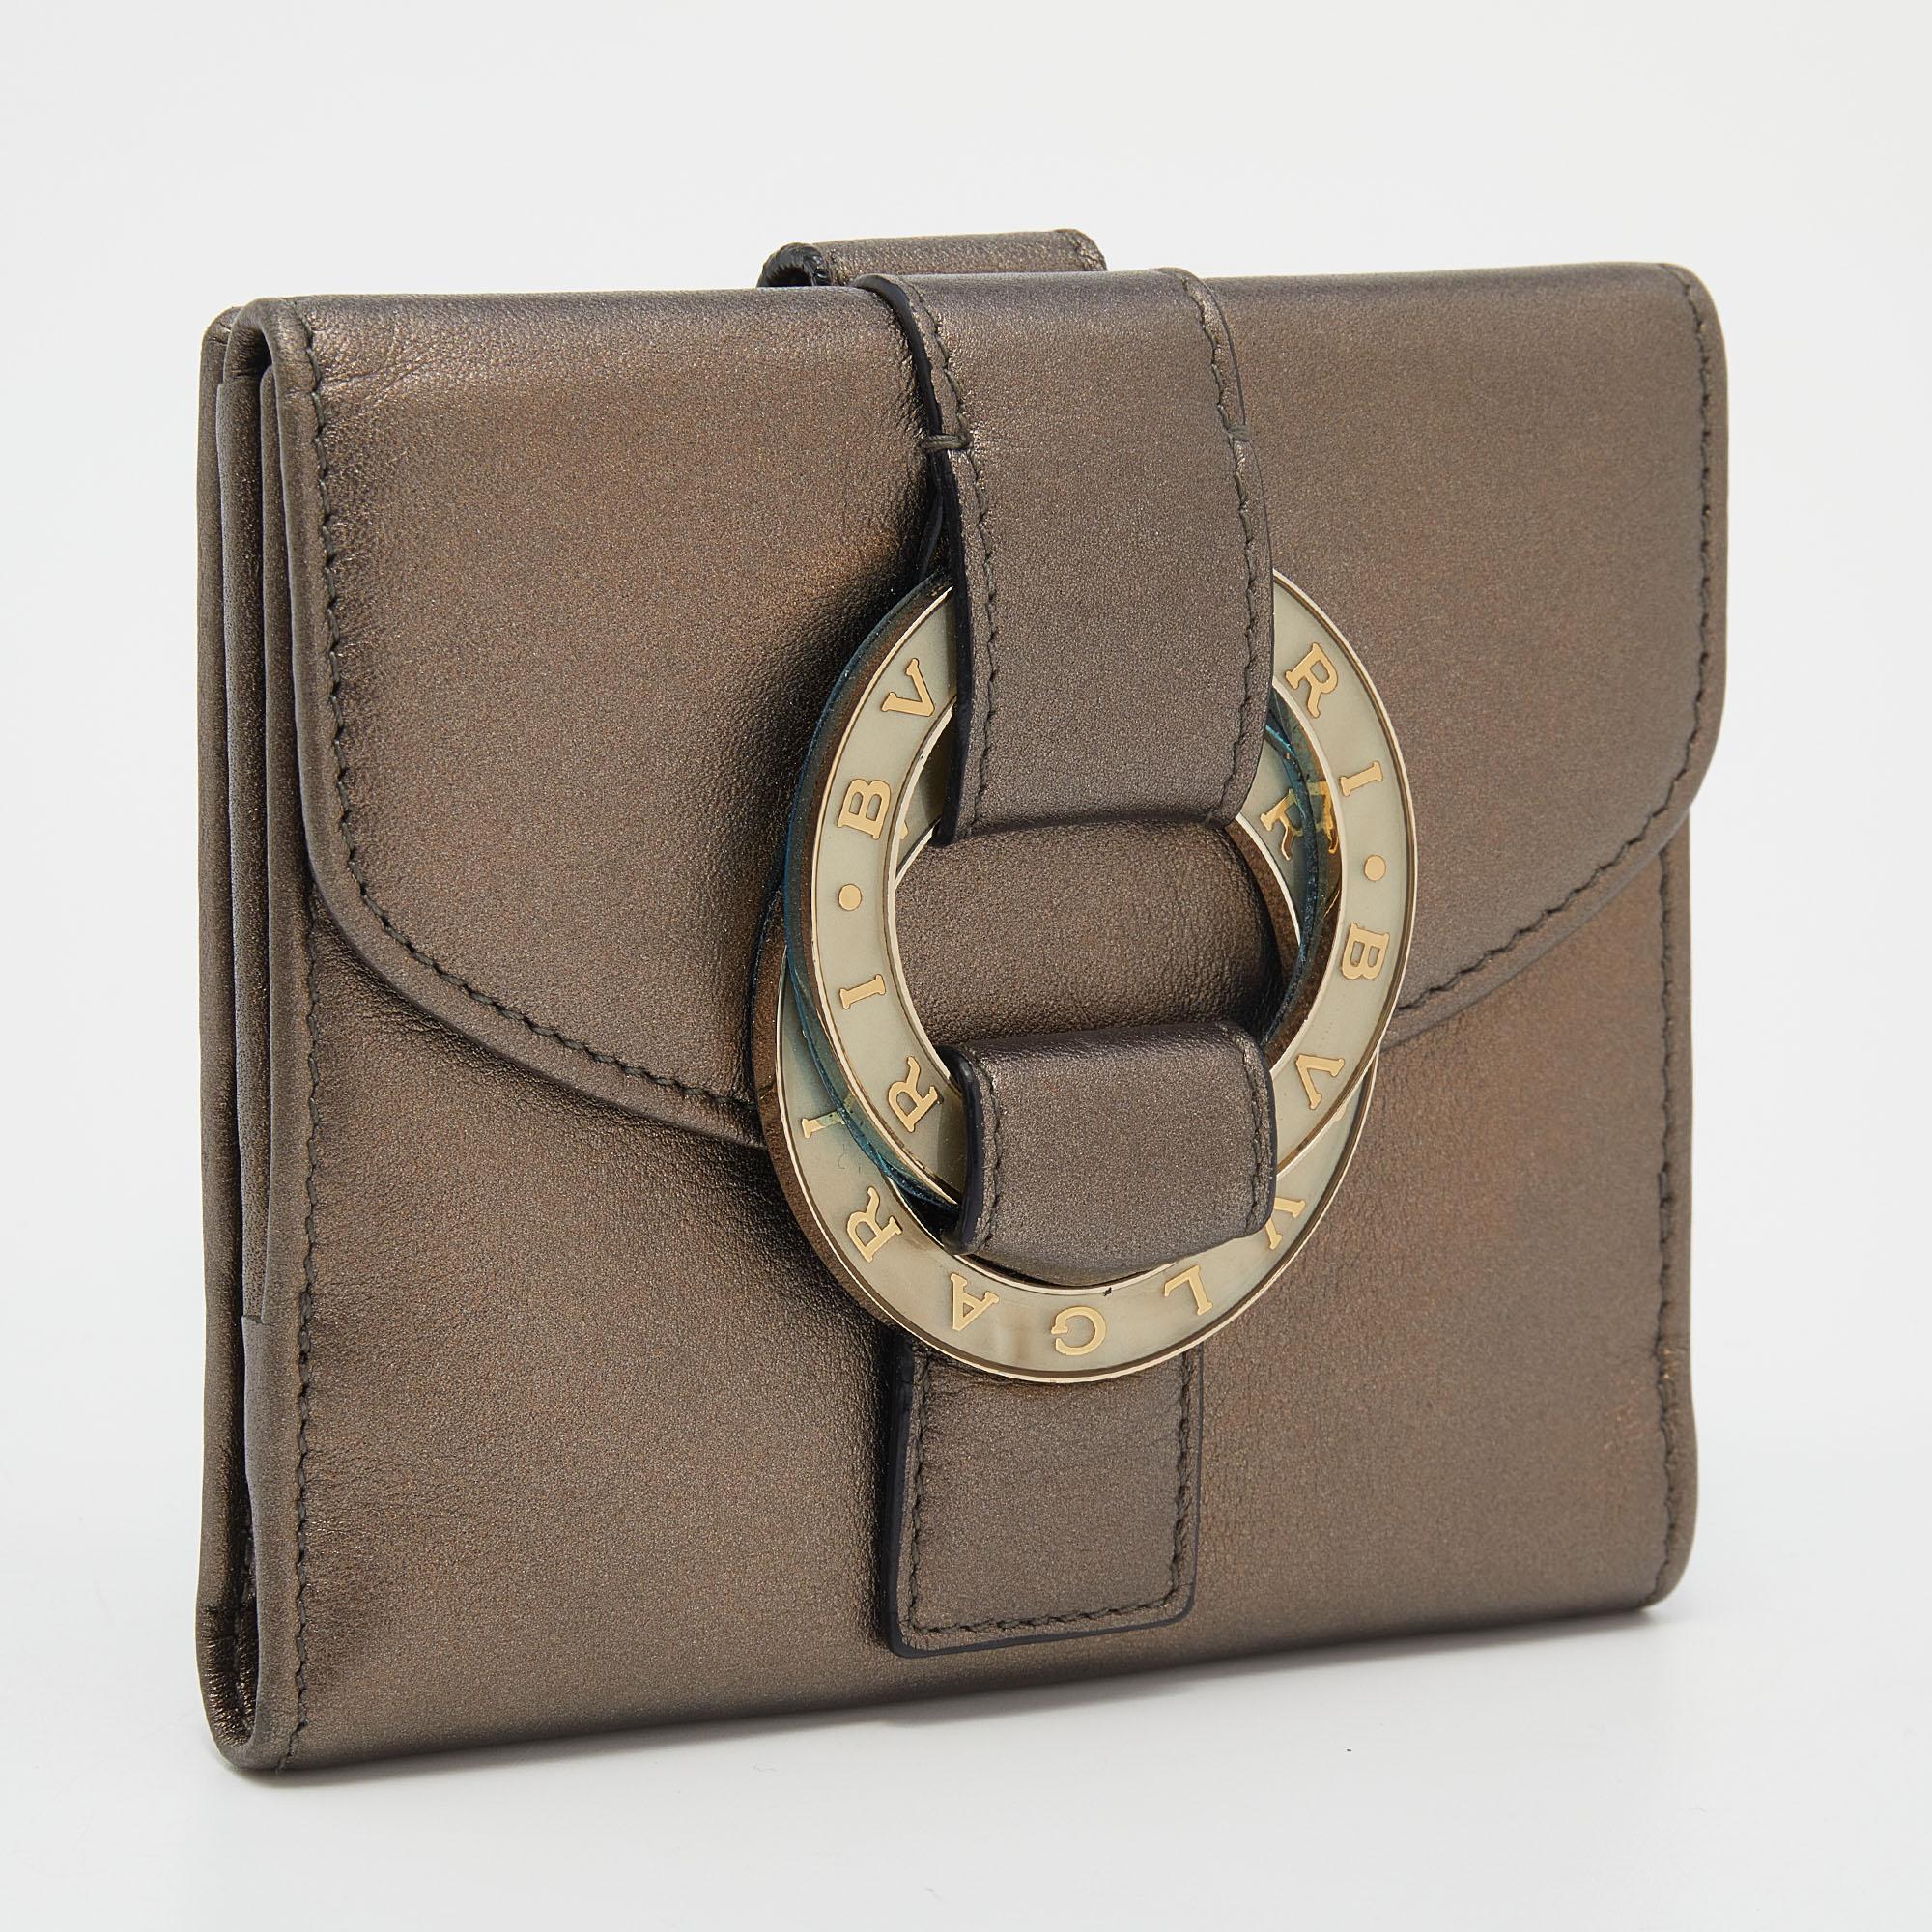 Gray Bvlgari Metallic Brown Leather Double Ring Flap Compact Wallet